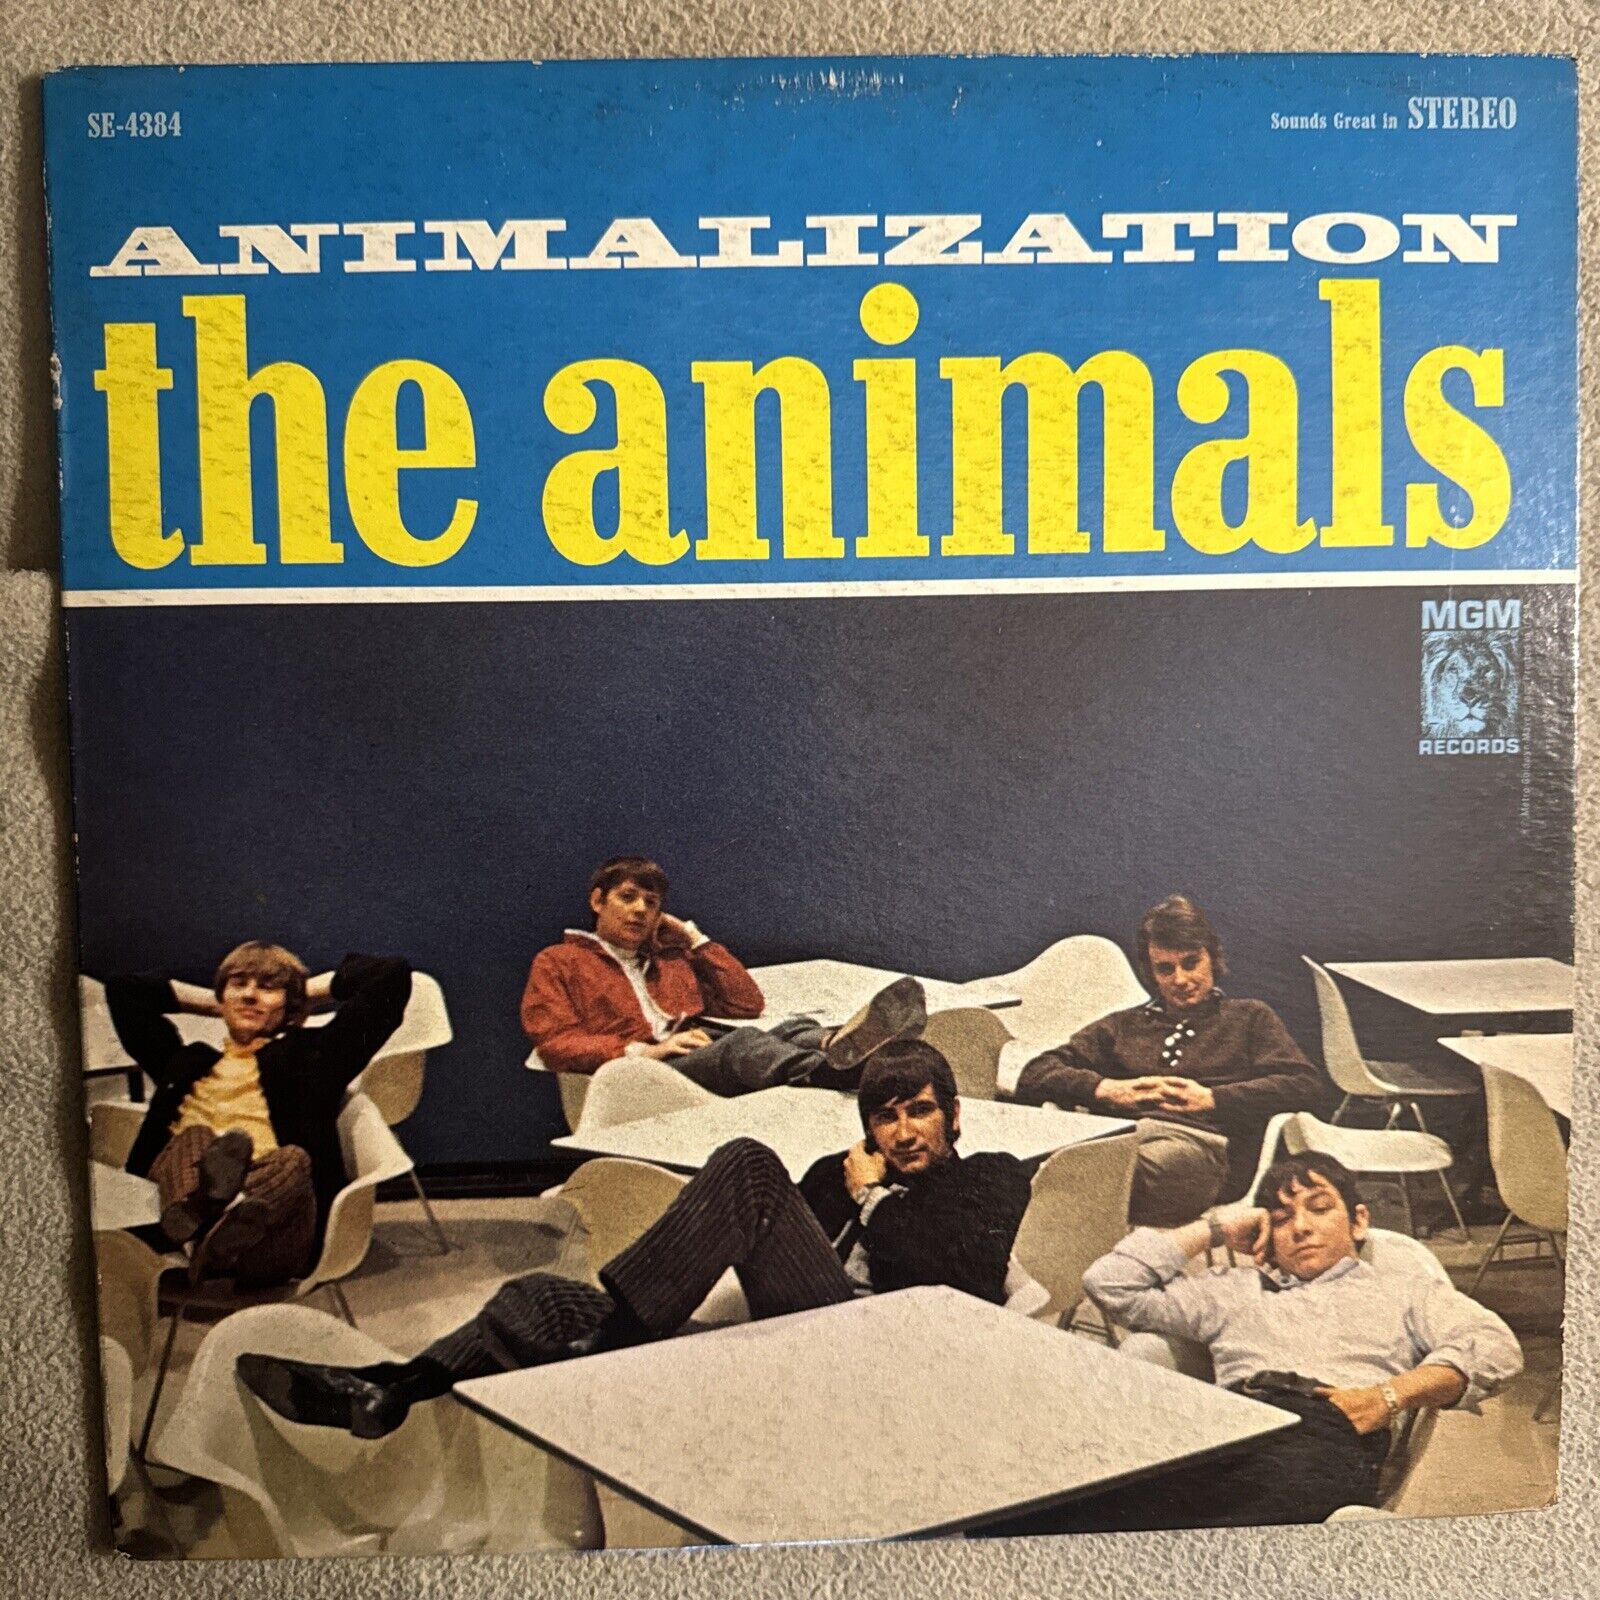 Vintage The Animals Album LP Animalization Nice Condition 1966 MGM Records